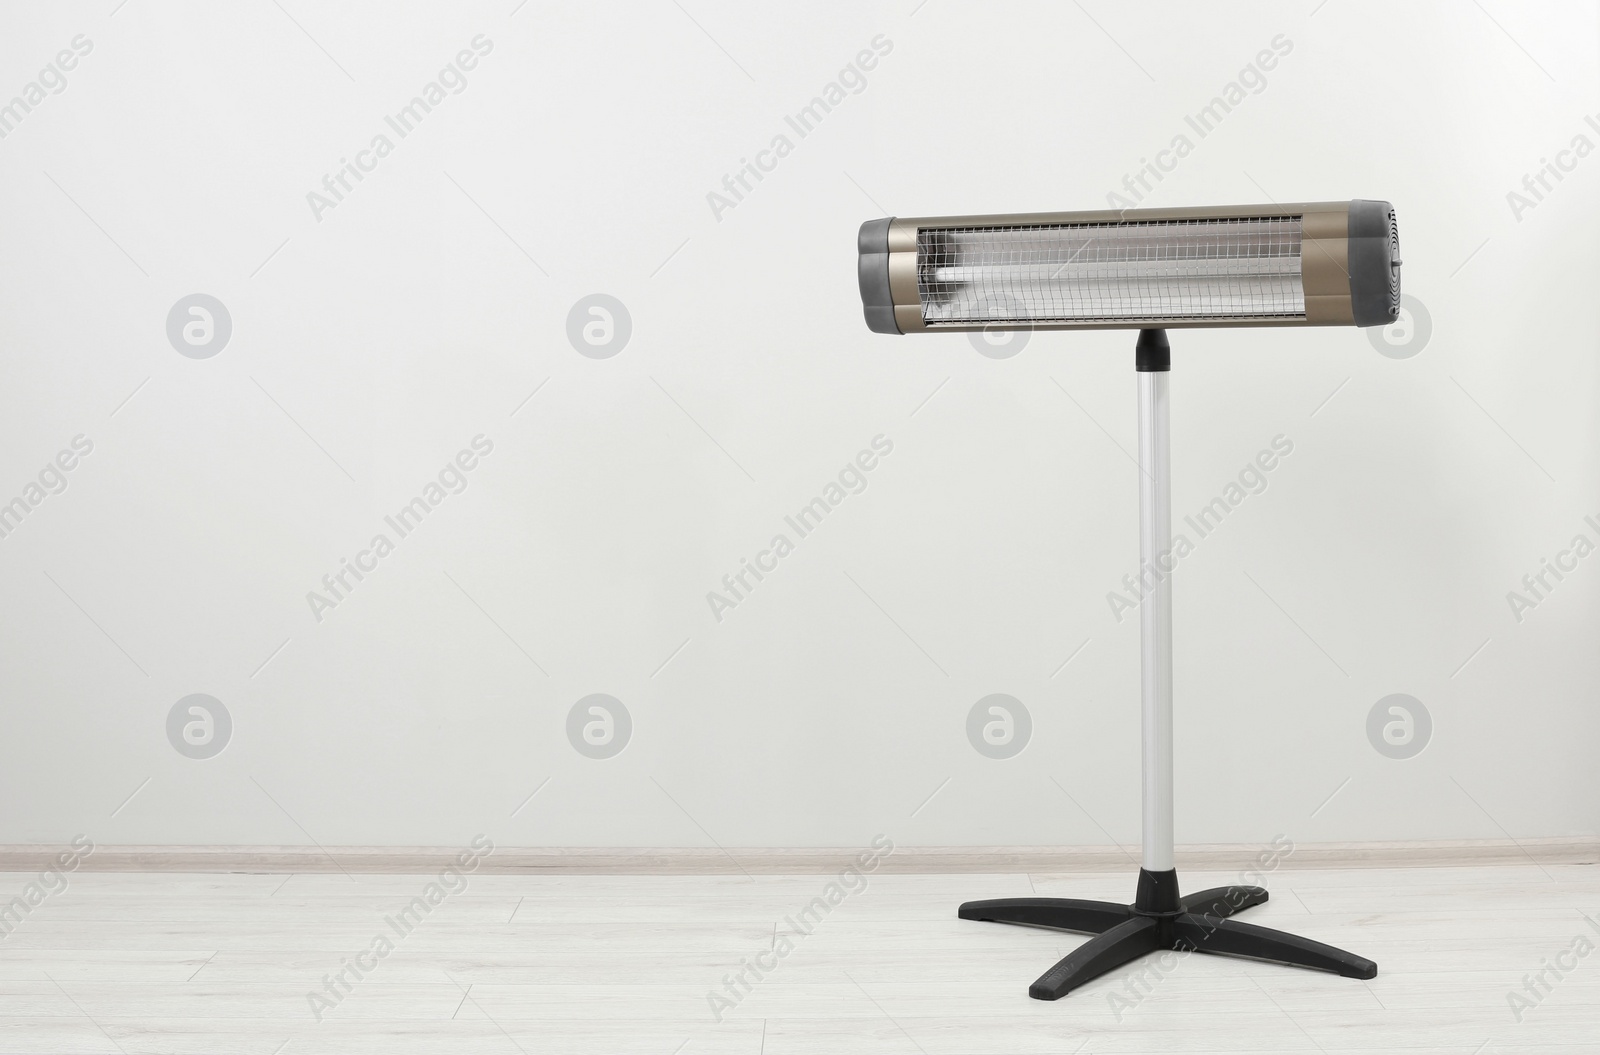 Photo of Electric infrared heater on floor near white wall indoors, space for text